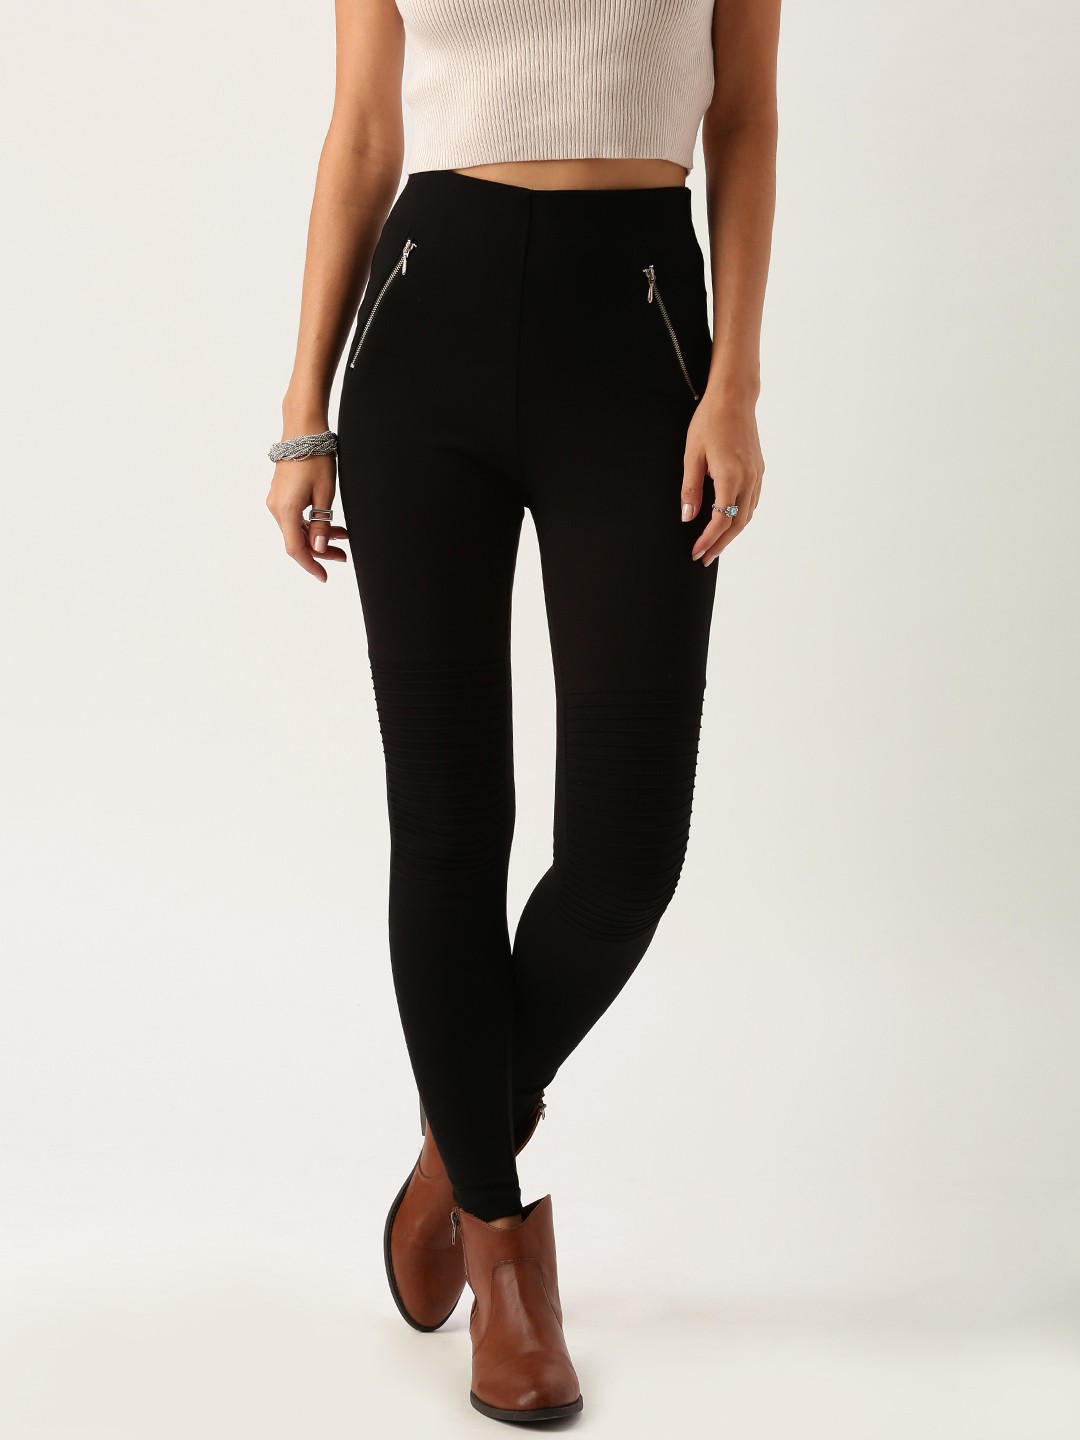 All About You By Deepika Padukone Black Casual Trousers